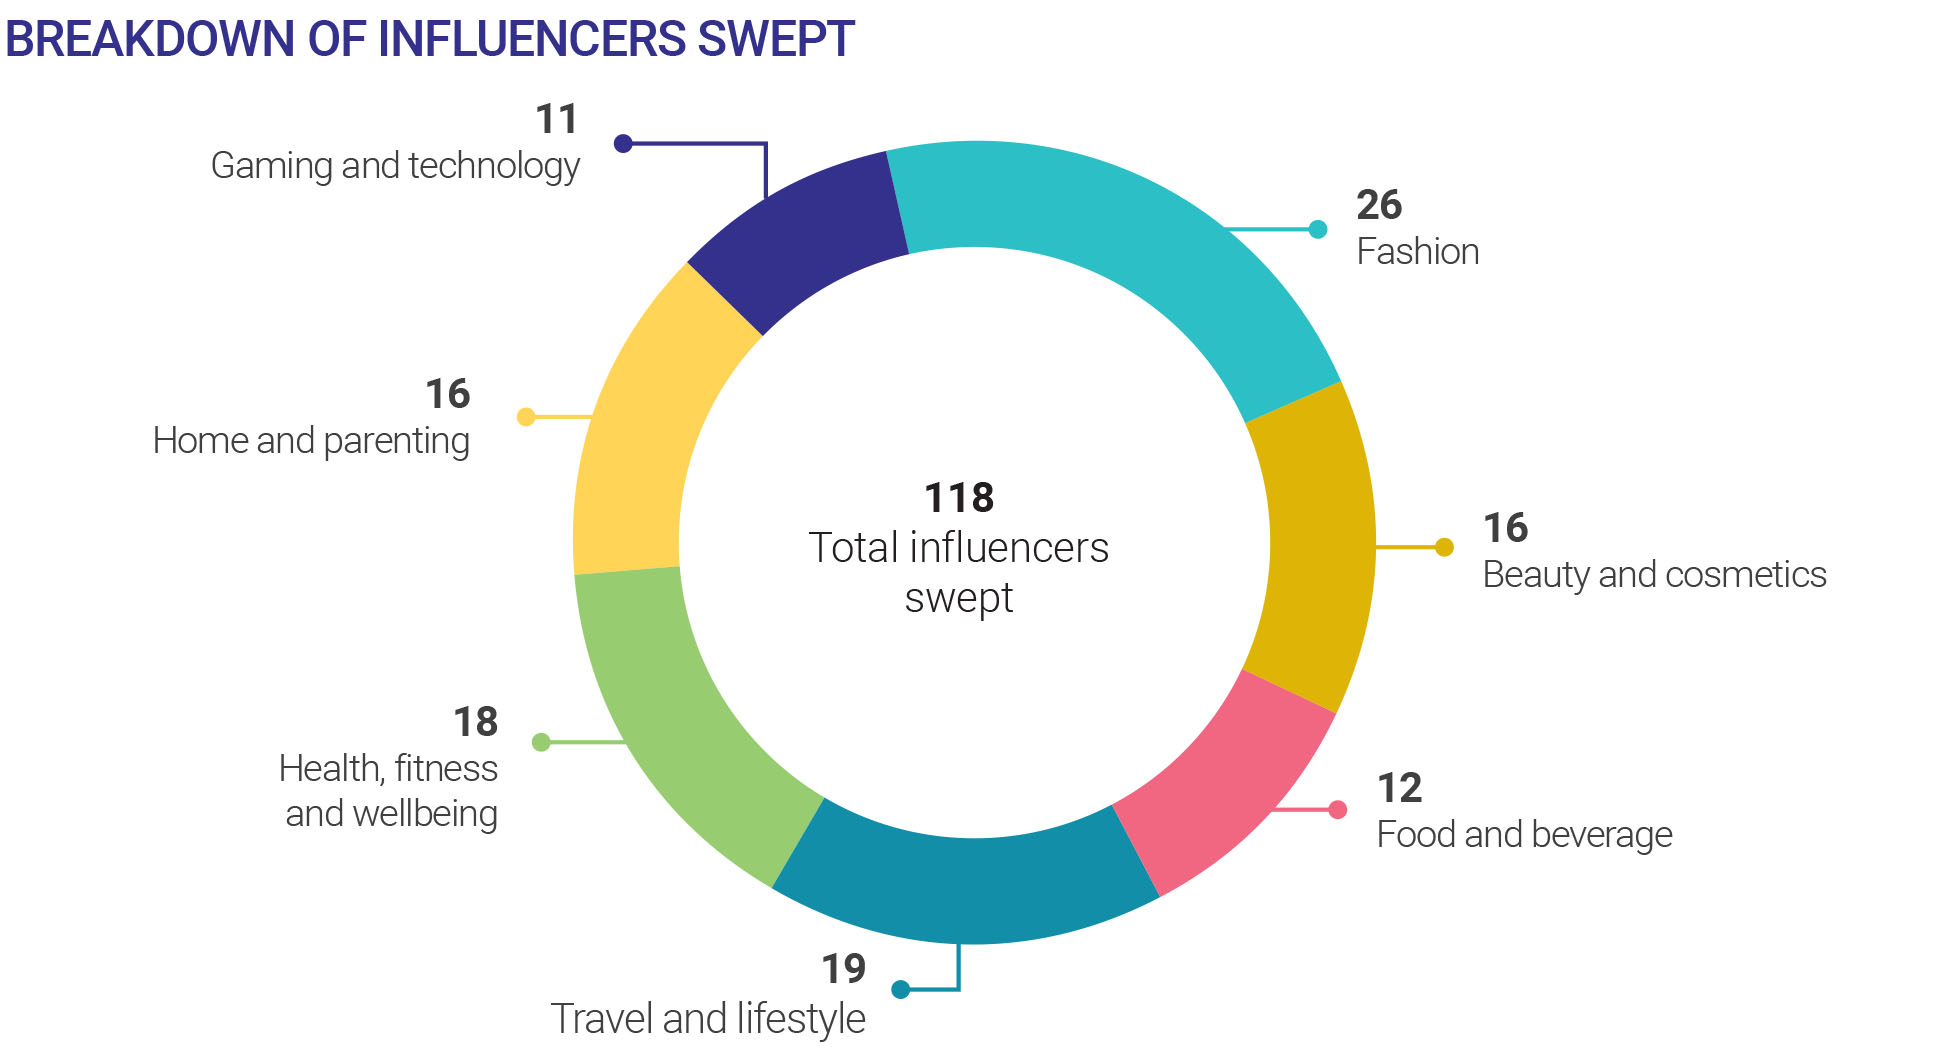 Breakdown by sector of the 118 influencers swept 